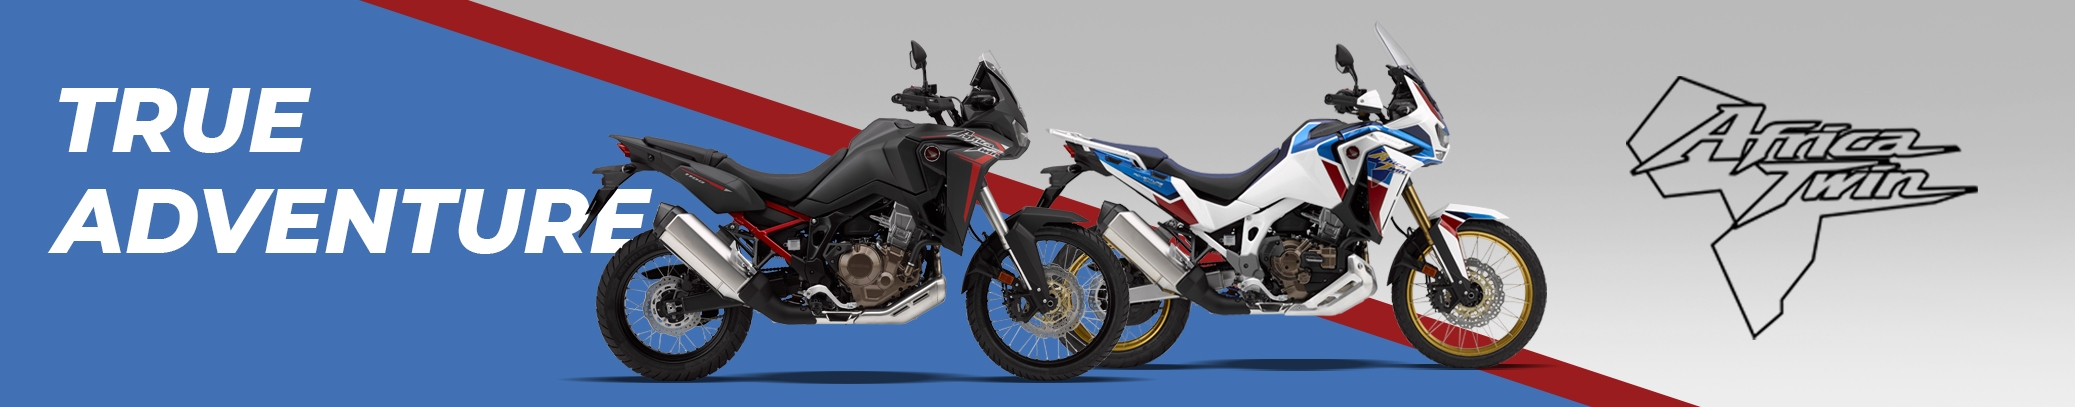 The 2020 CRF1100L Africa Twin